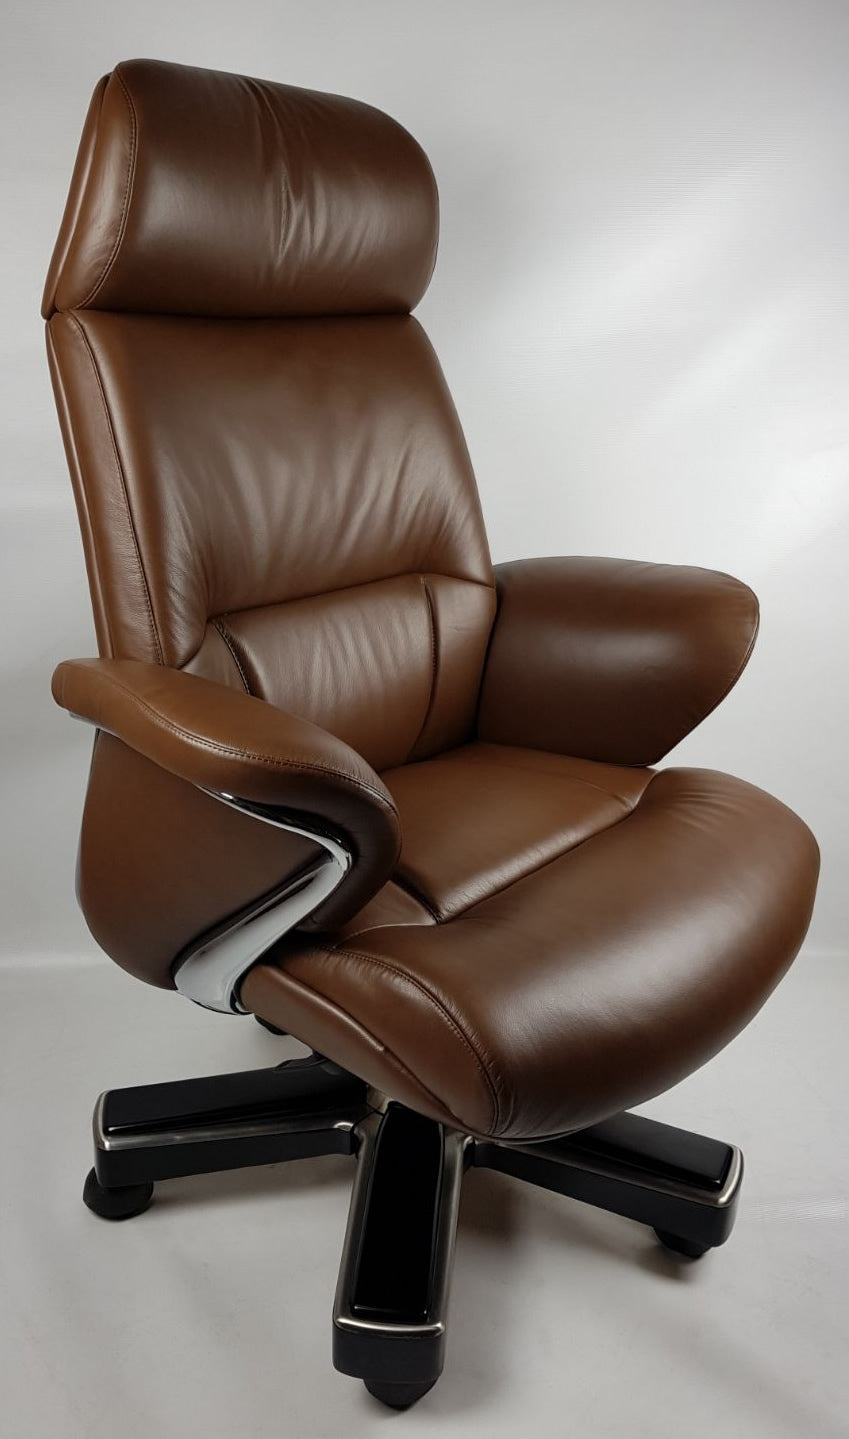 Large Luxury Executive Office Chair with Genuine Brown Leather - YS1605A UK